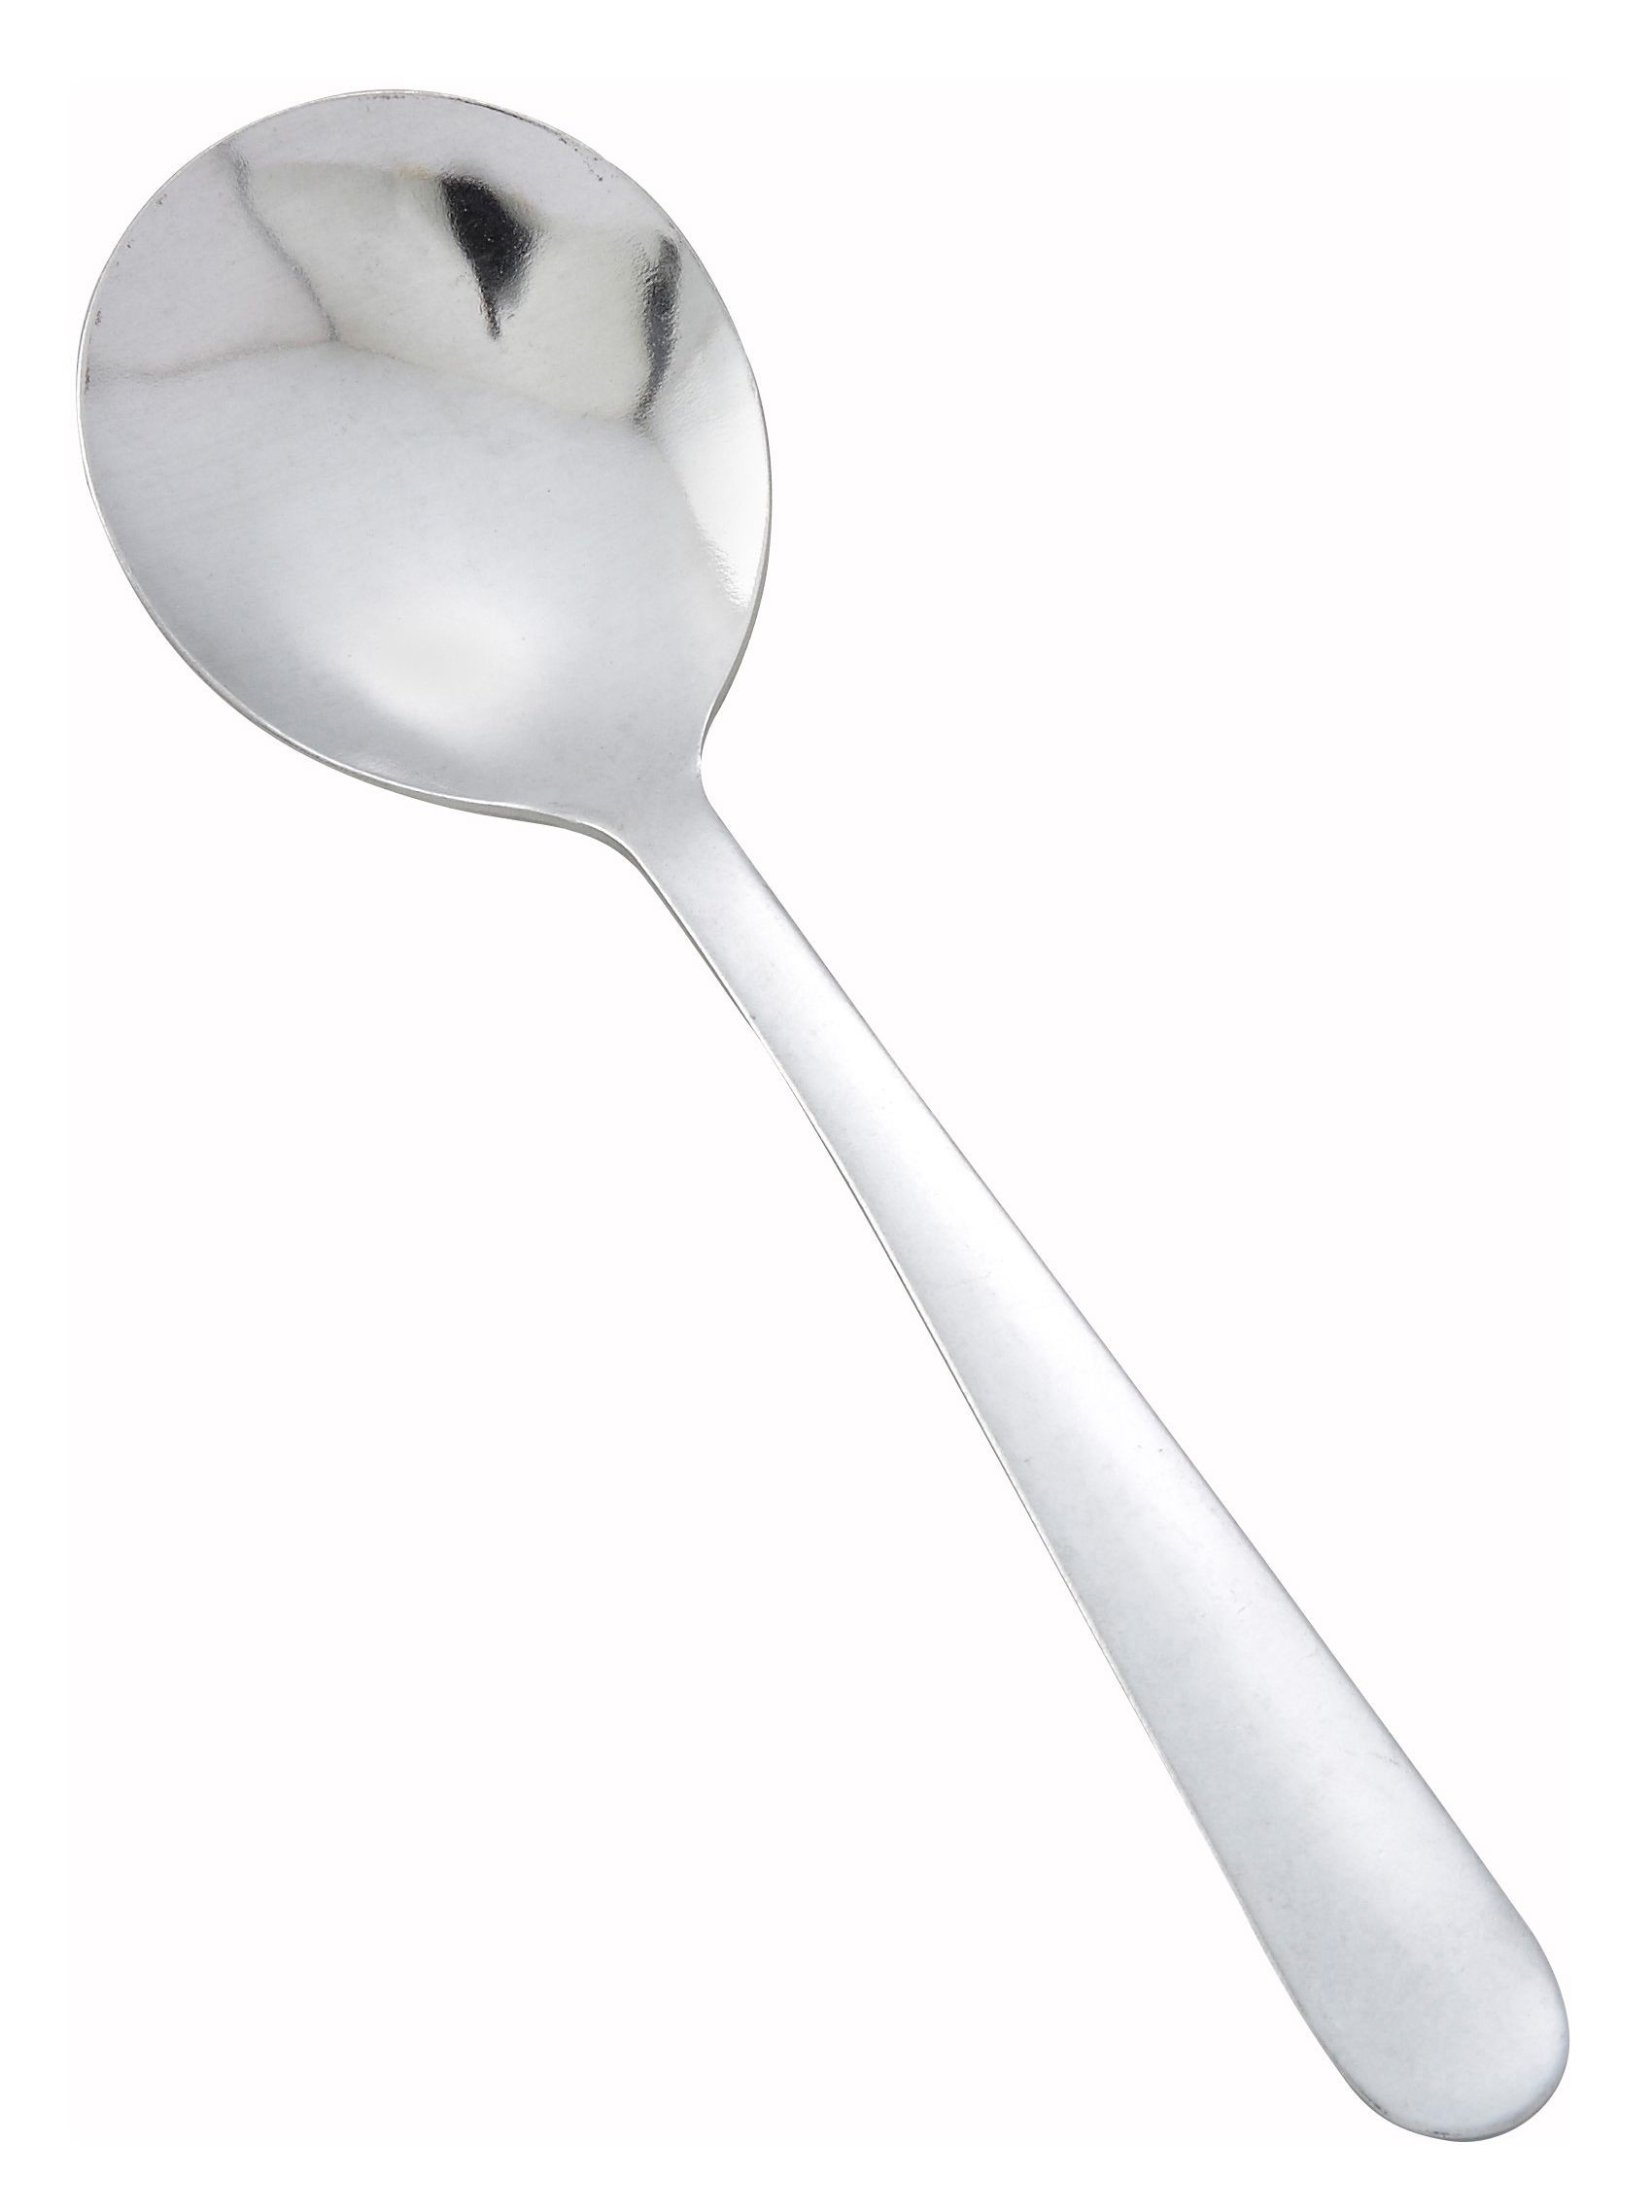 Winco 0002-04 Windsor Medium Weight 18/0 Stainless Steel Bouillon Spoon (12/Pack)